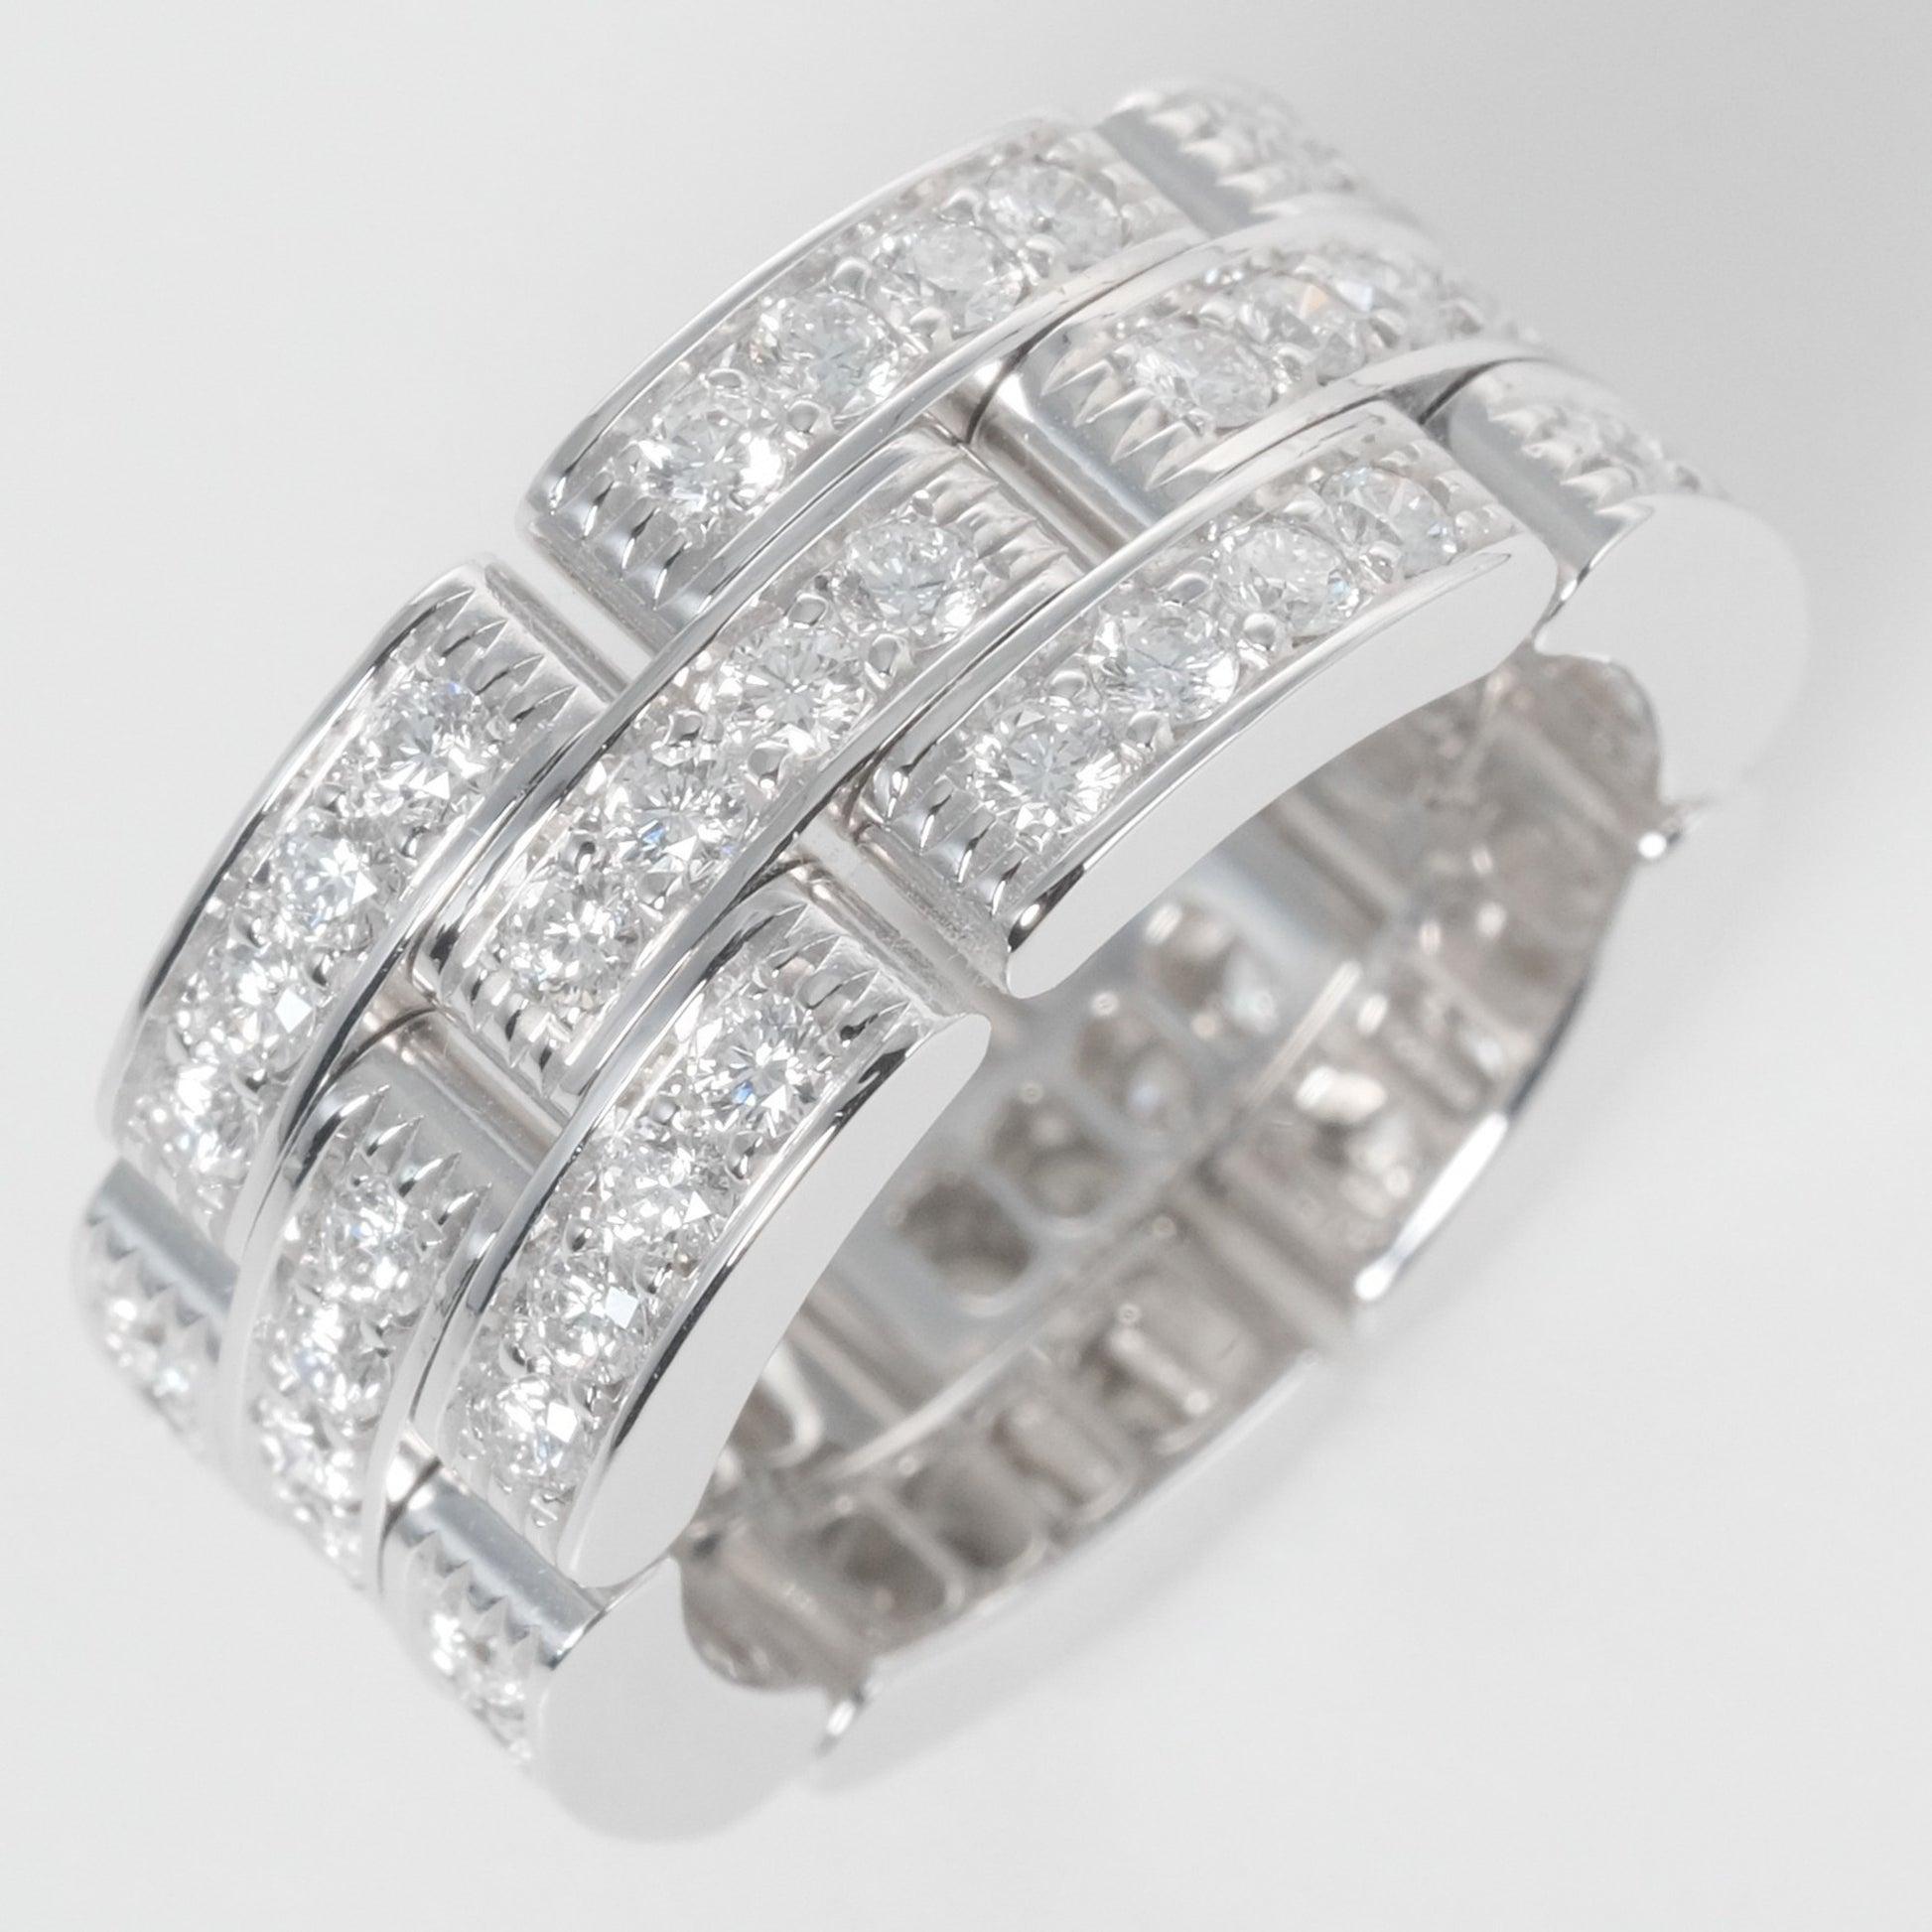 Cartier Maillon Panthere 3 Row Diamond Ring in 18K White Gold For Sale 5